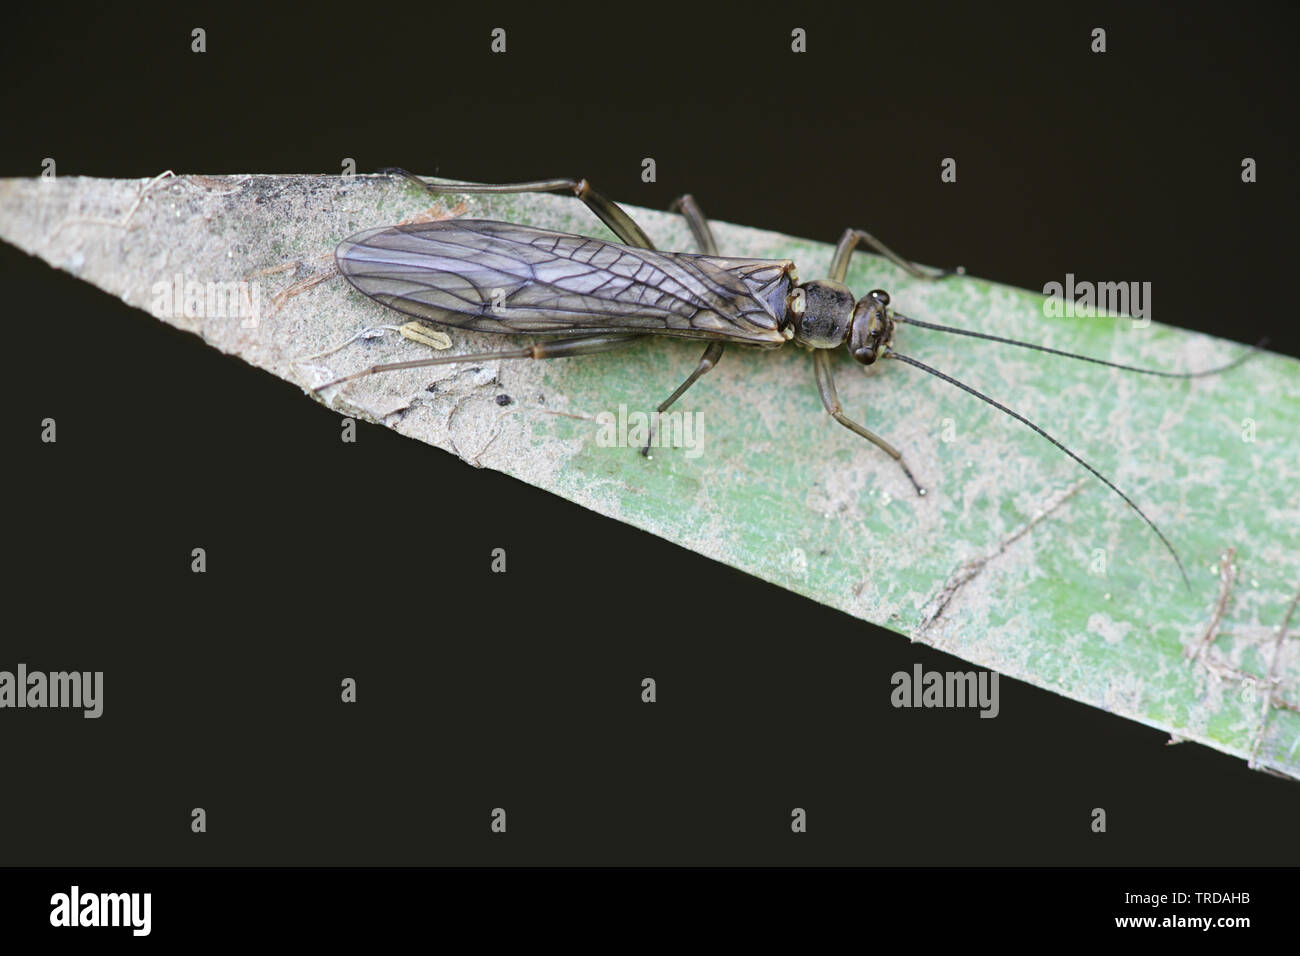 Nemoura cinerea, known as spring stonefly or brown stoneflies. Fly fishermen often refer to these insects as tiny winter blacks. Stock Photo